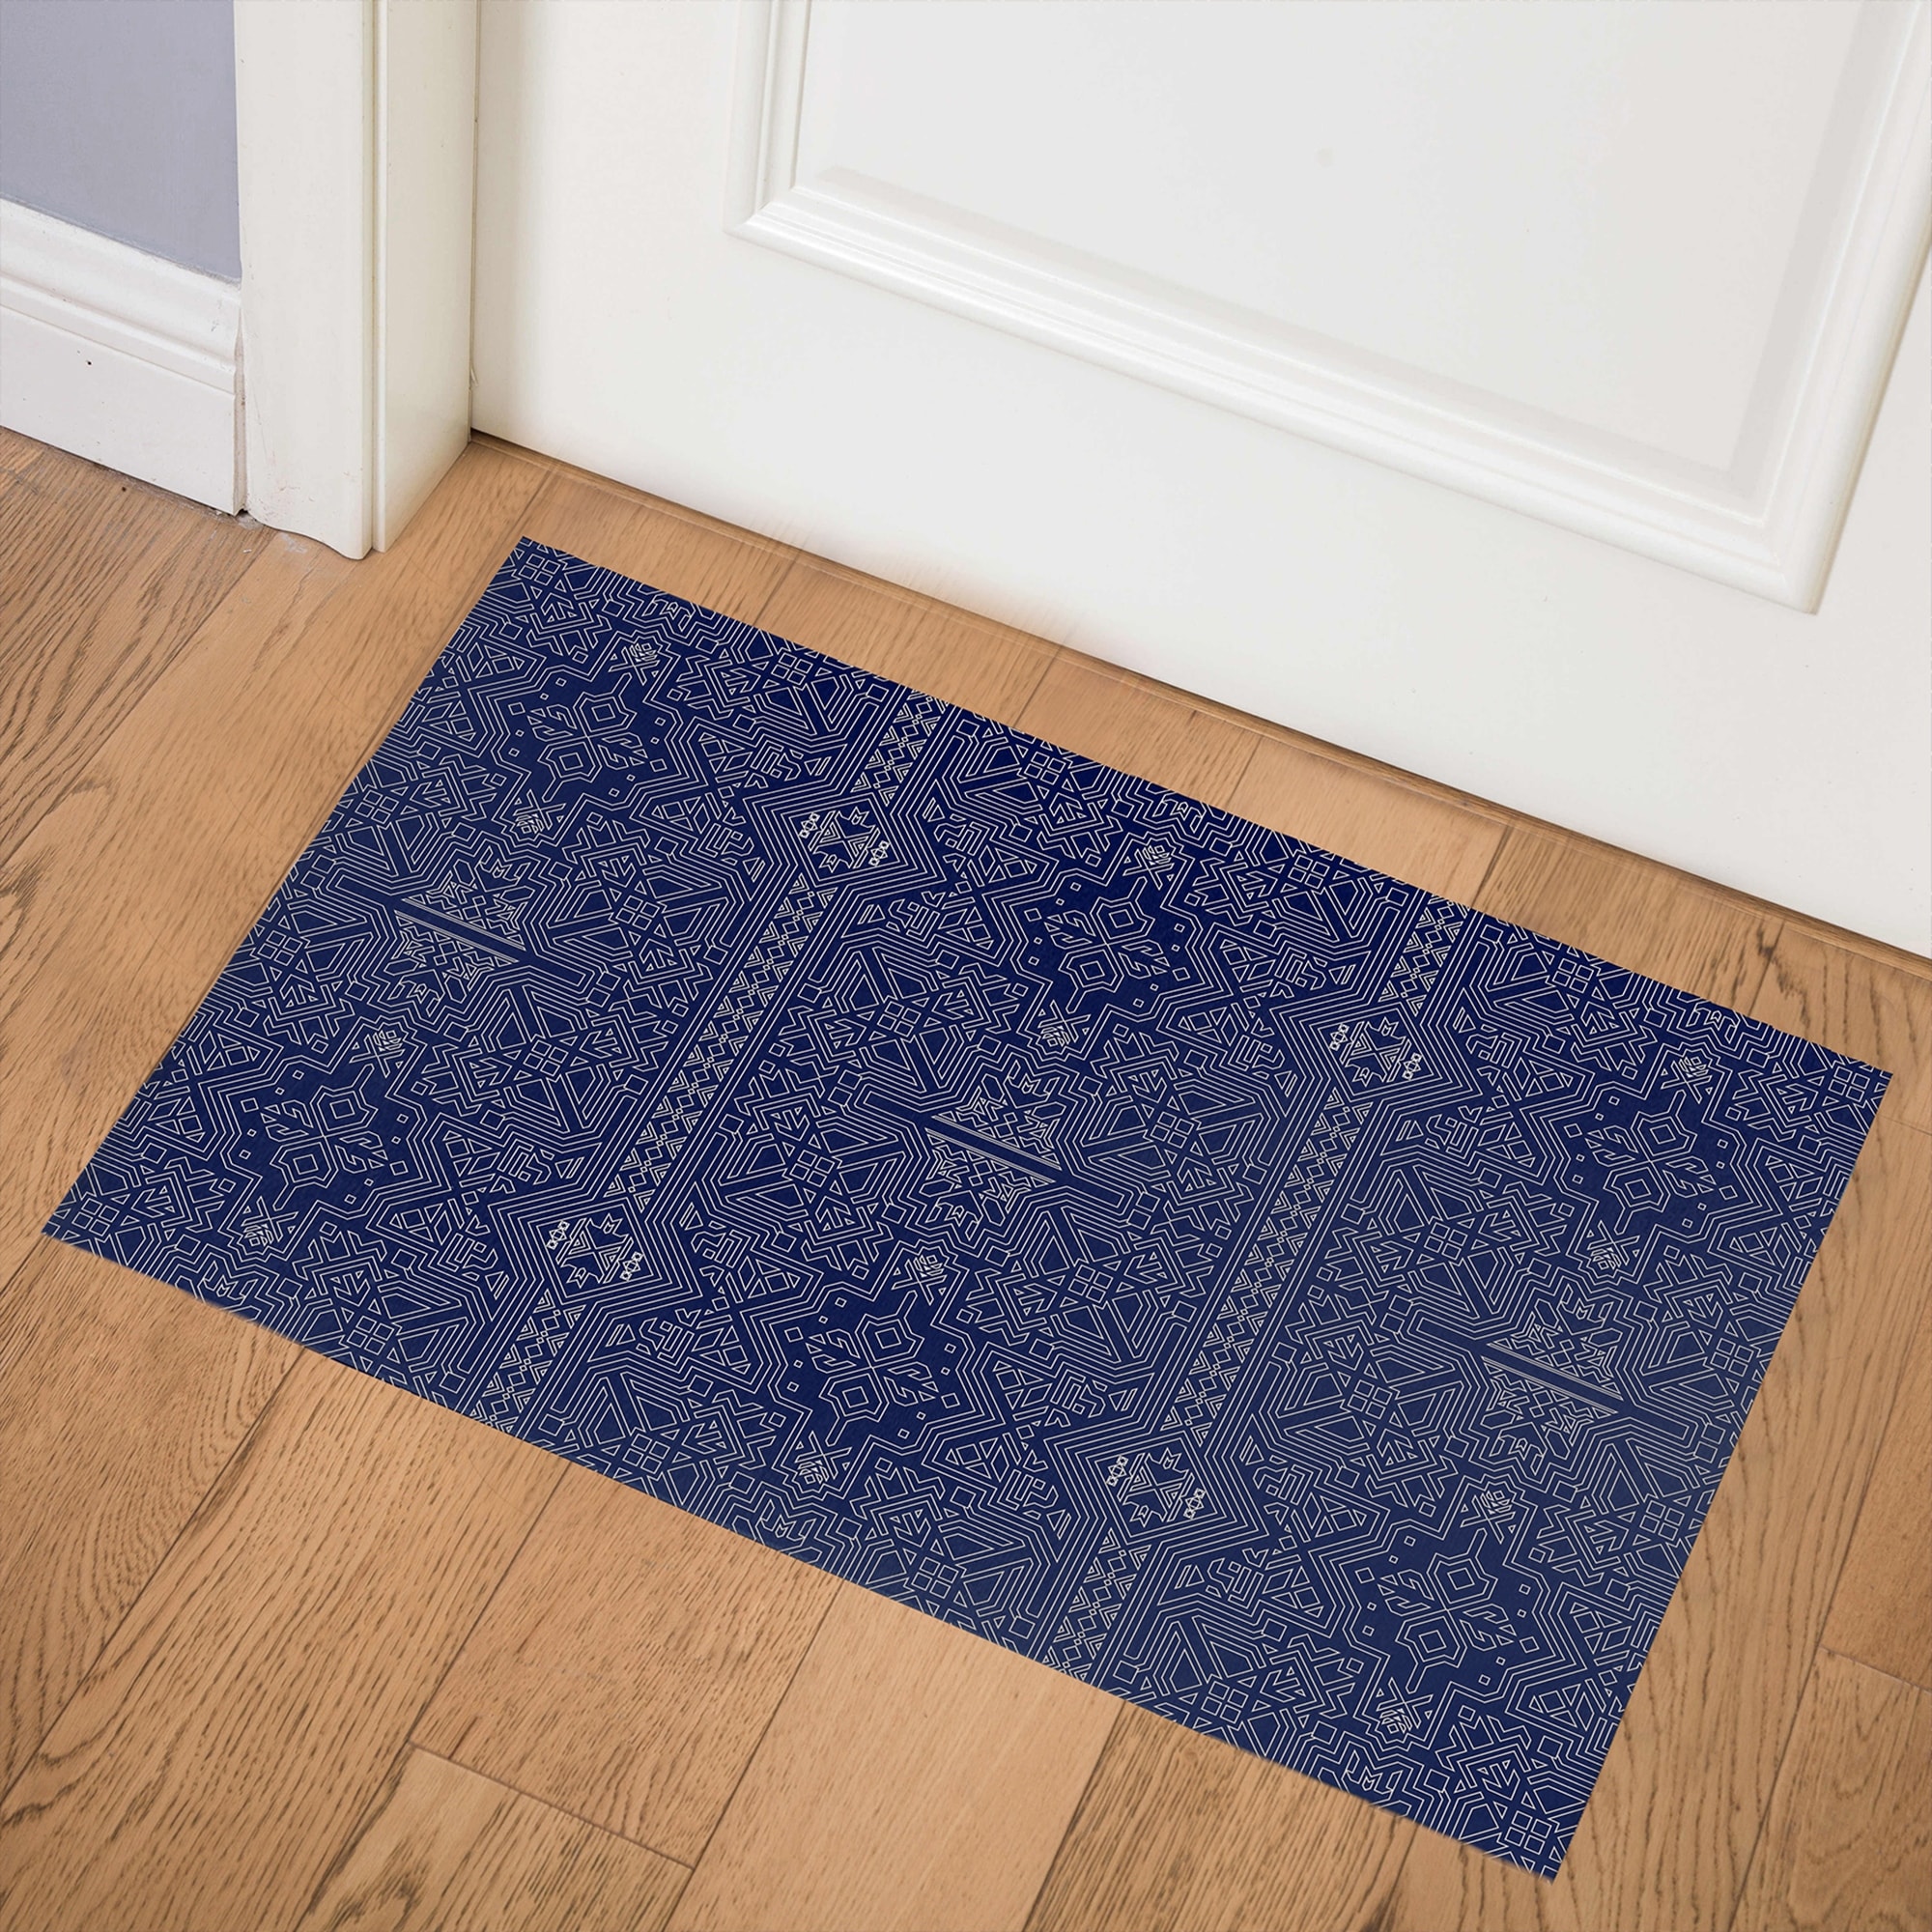 https://ak1.ostkcdn.com/images/products/is/images/direct/82c9d6e0545c29031121dc0455be0ed46c89fdc5/SULTANATE-NAVY-Indoor-Floor-Mat-By-Kavka-Designs.jpg